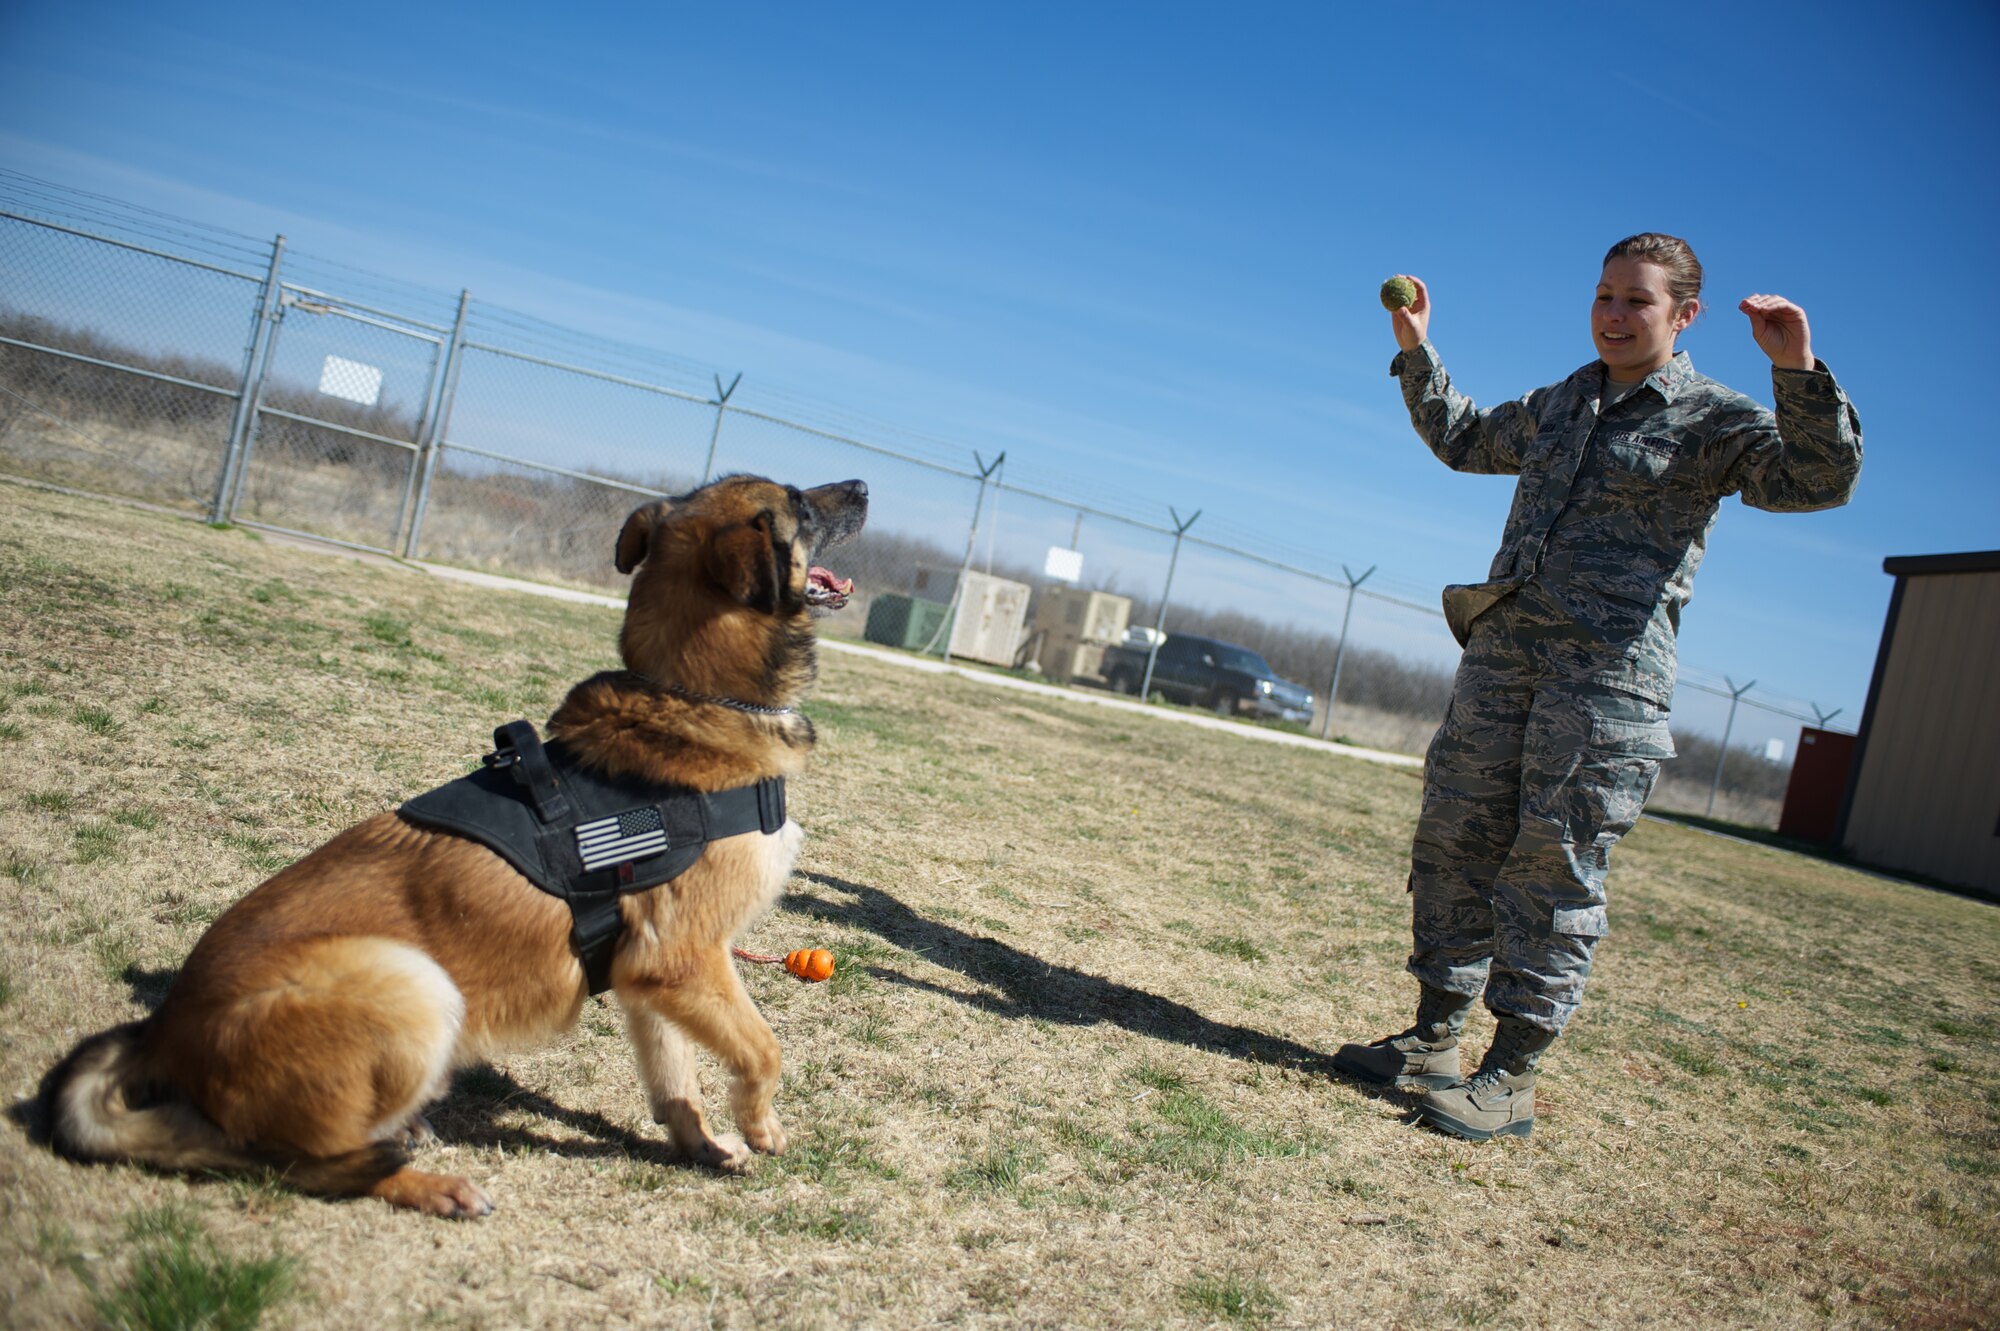 U.S. Air Force 2nd. Lt. Karrissa Garza, 7th Logistics Readiness Squadron, gives a speak command to military working dog (MWD) Condor March 26, 2013, at the 7th Security Forces Squadron MWD Compound on Dyess Air Force Base Texas. Garza is in the process of adopting Condor upon his retirement from the Air Force and pays frequent visits in order to form a bond with the dog. Condor, an 8 year old belgian malinois, is a veteran of Operation Iraqi Freedom as well as supported the U.S. Secret Service. (U.S. Air Force Photo by Tech. Sgt. Joshua T. Jasper/Released)
